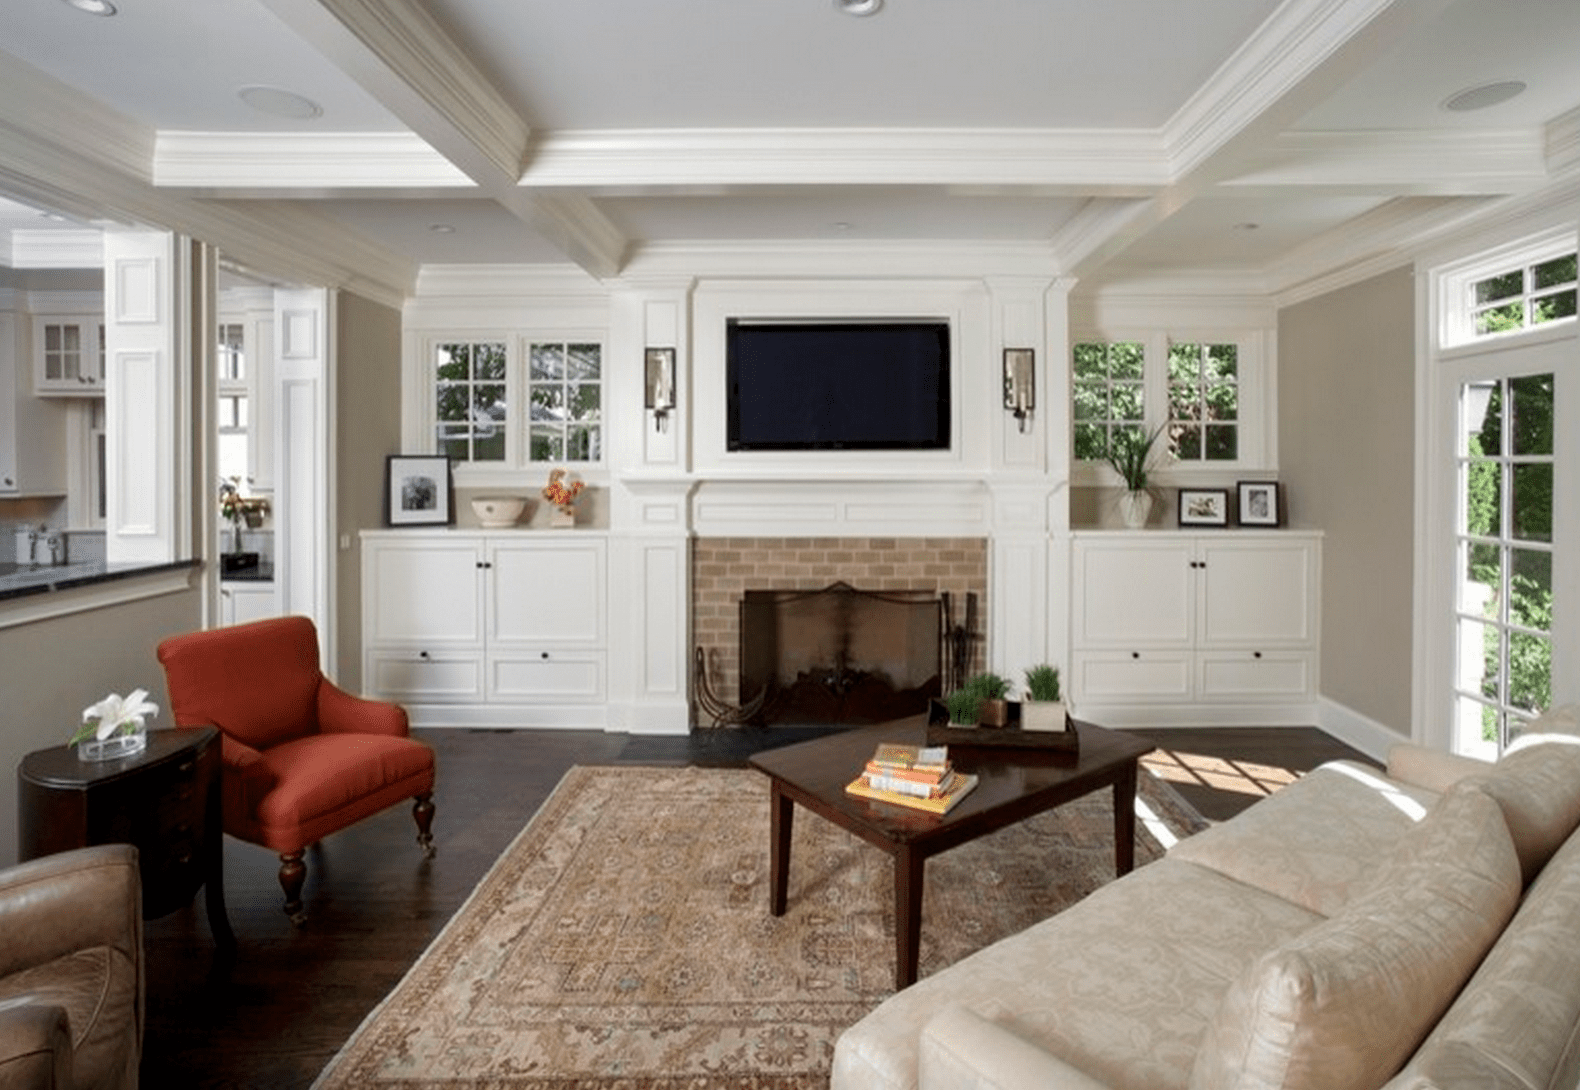 Free Standing Cabinets Next to Fireplace Best Of Beautiful Living Rooms with Built In Shelving